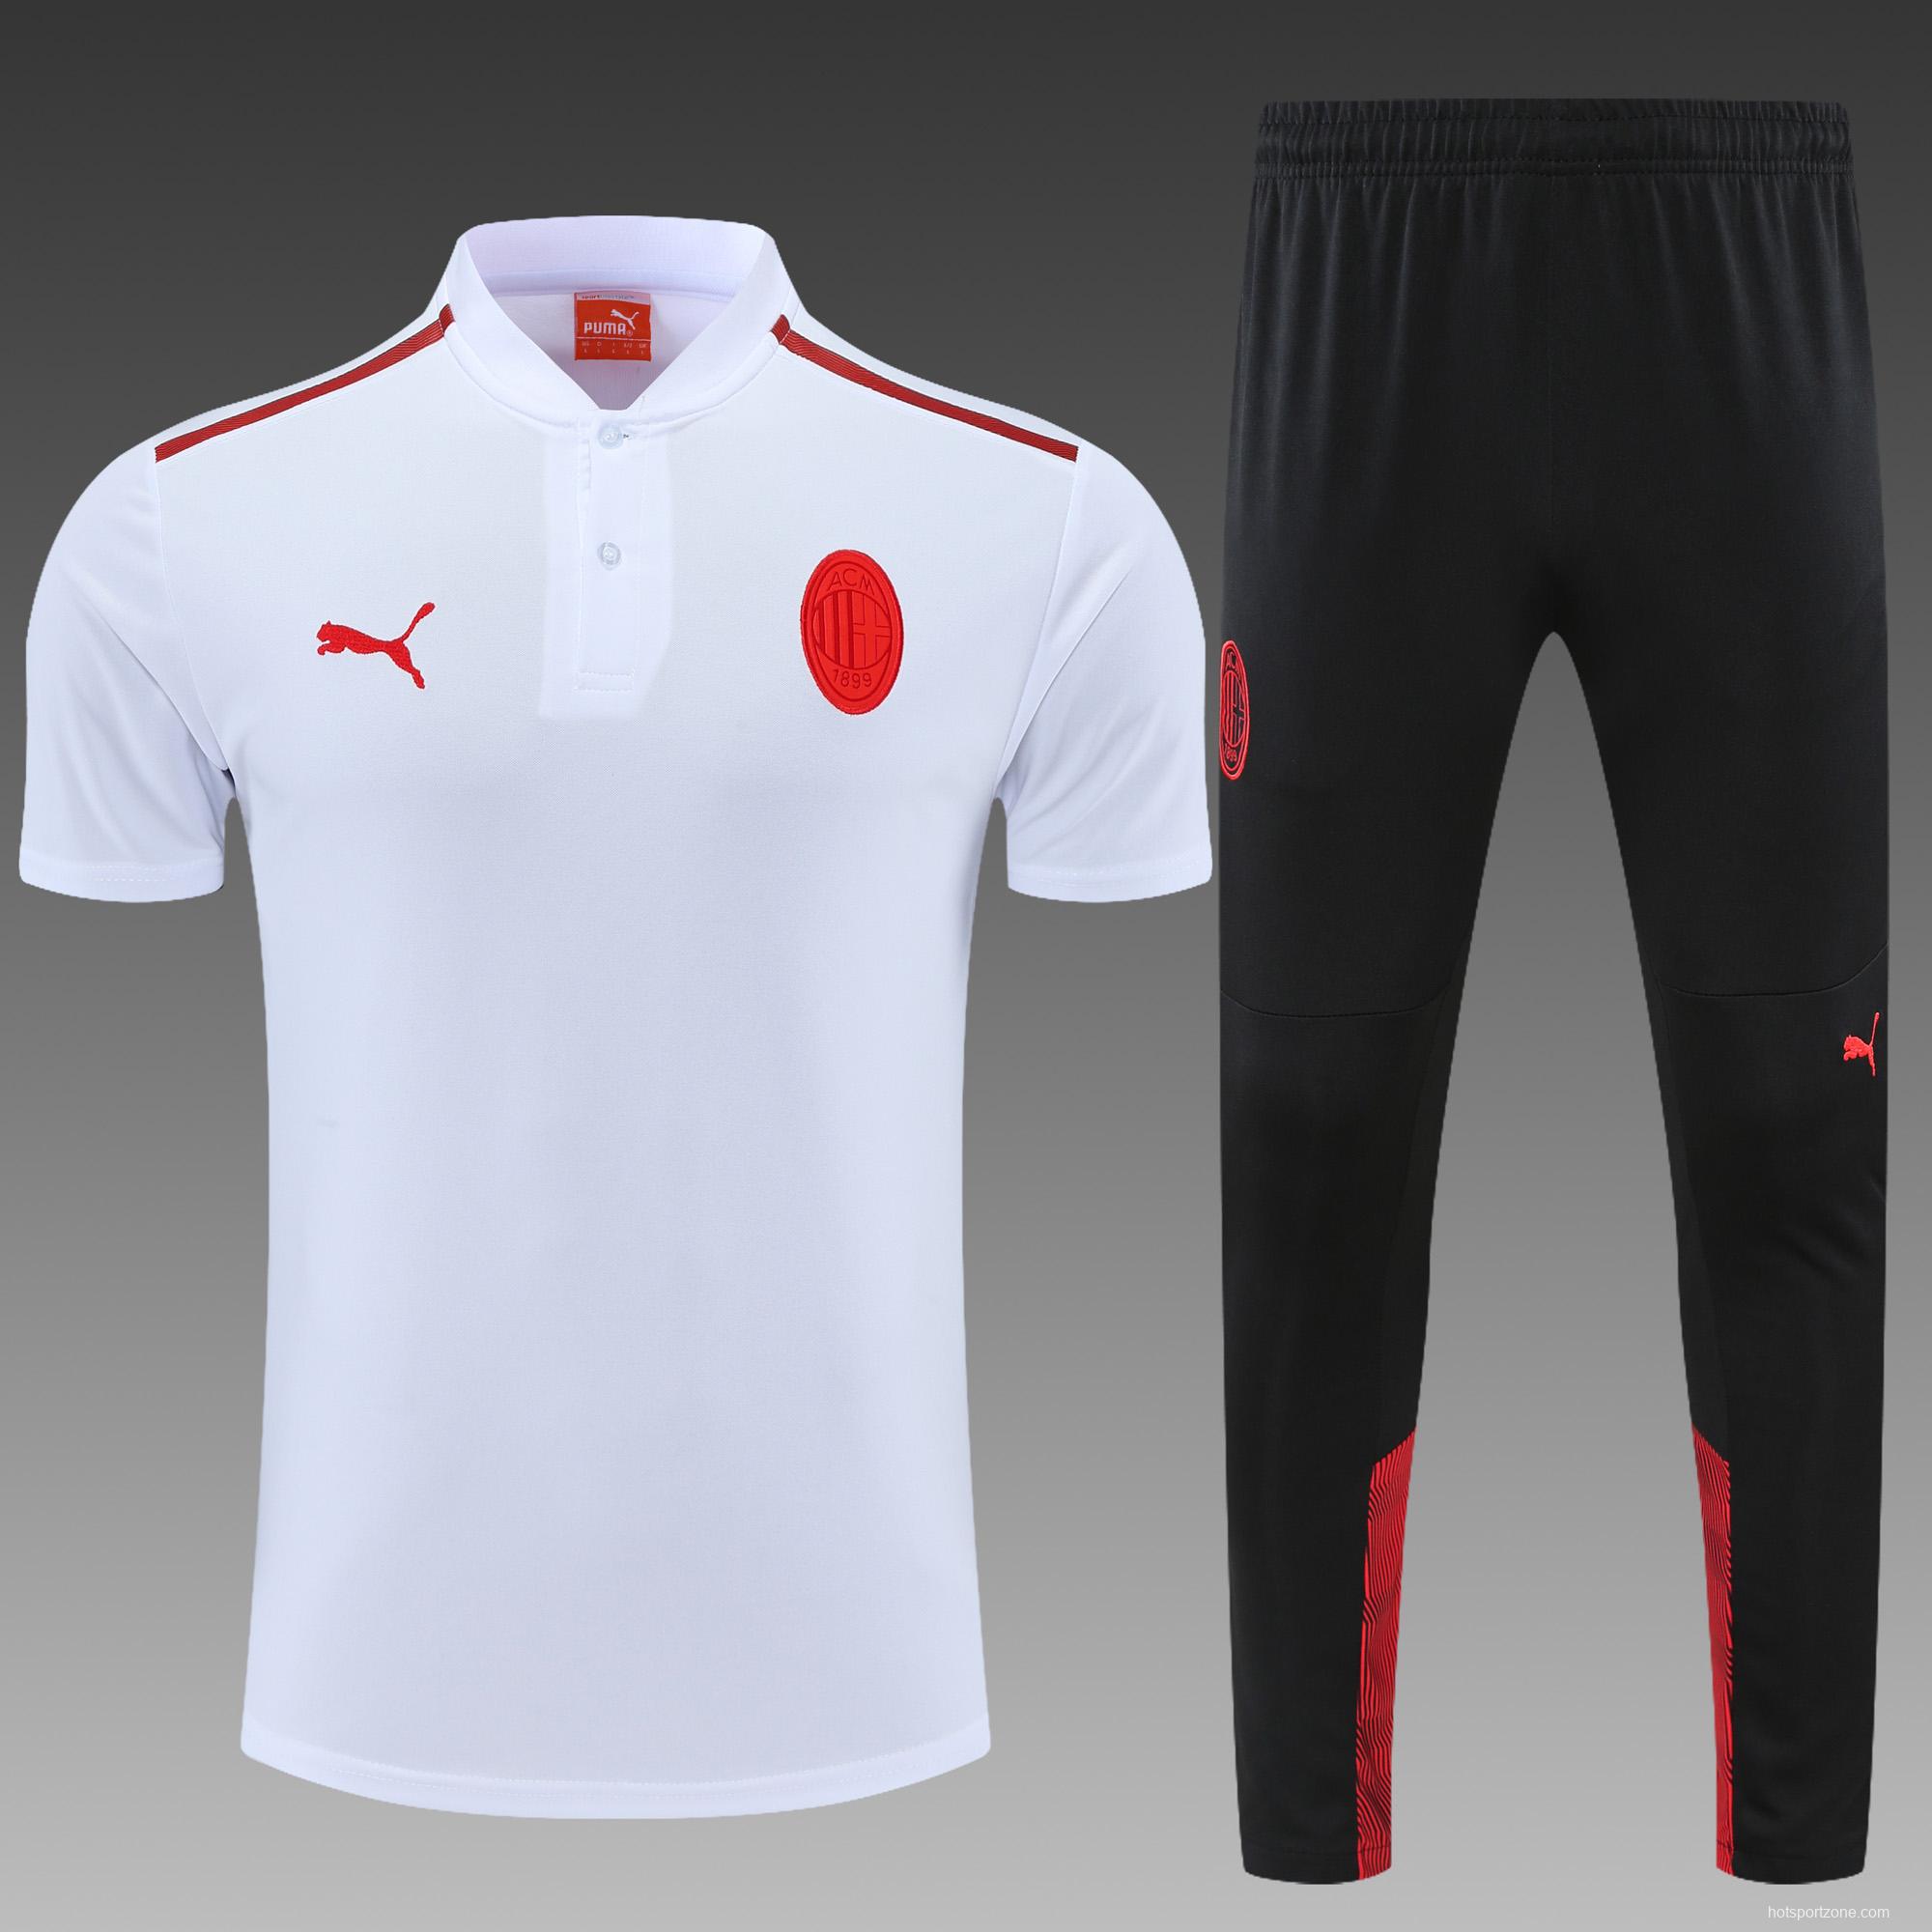 A.C. Milan POLO kit White (not supported to be sold separately)